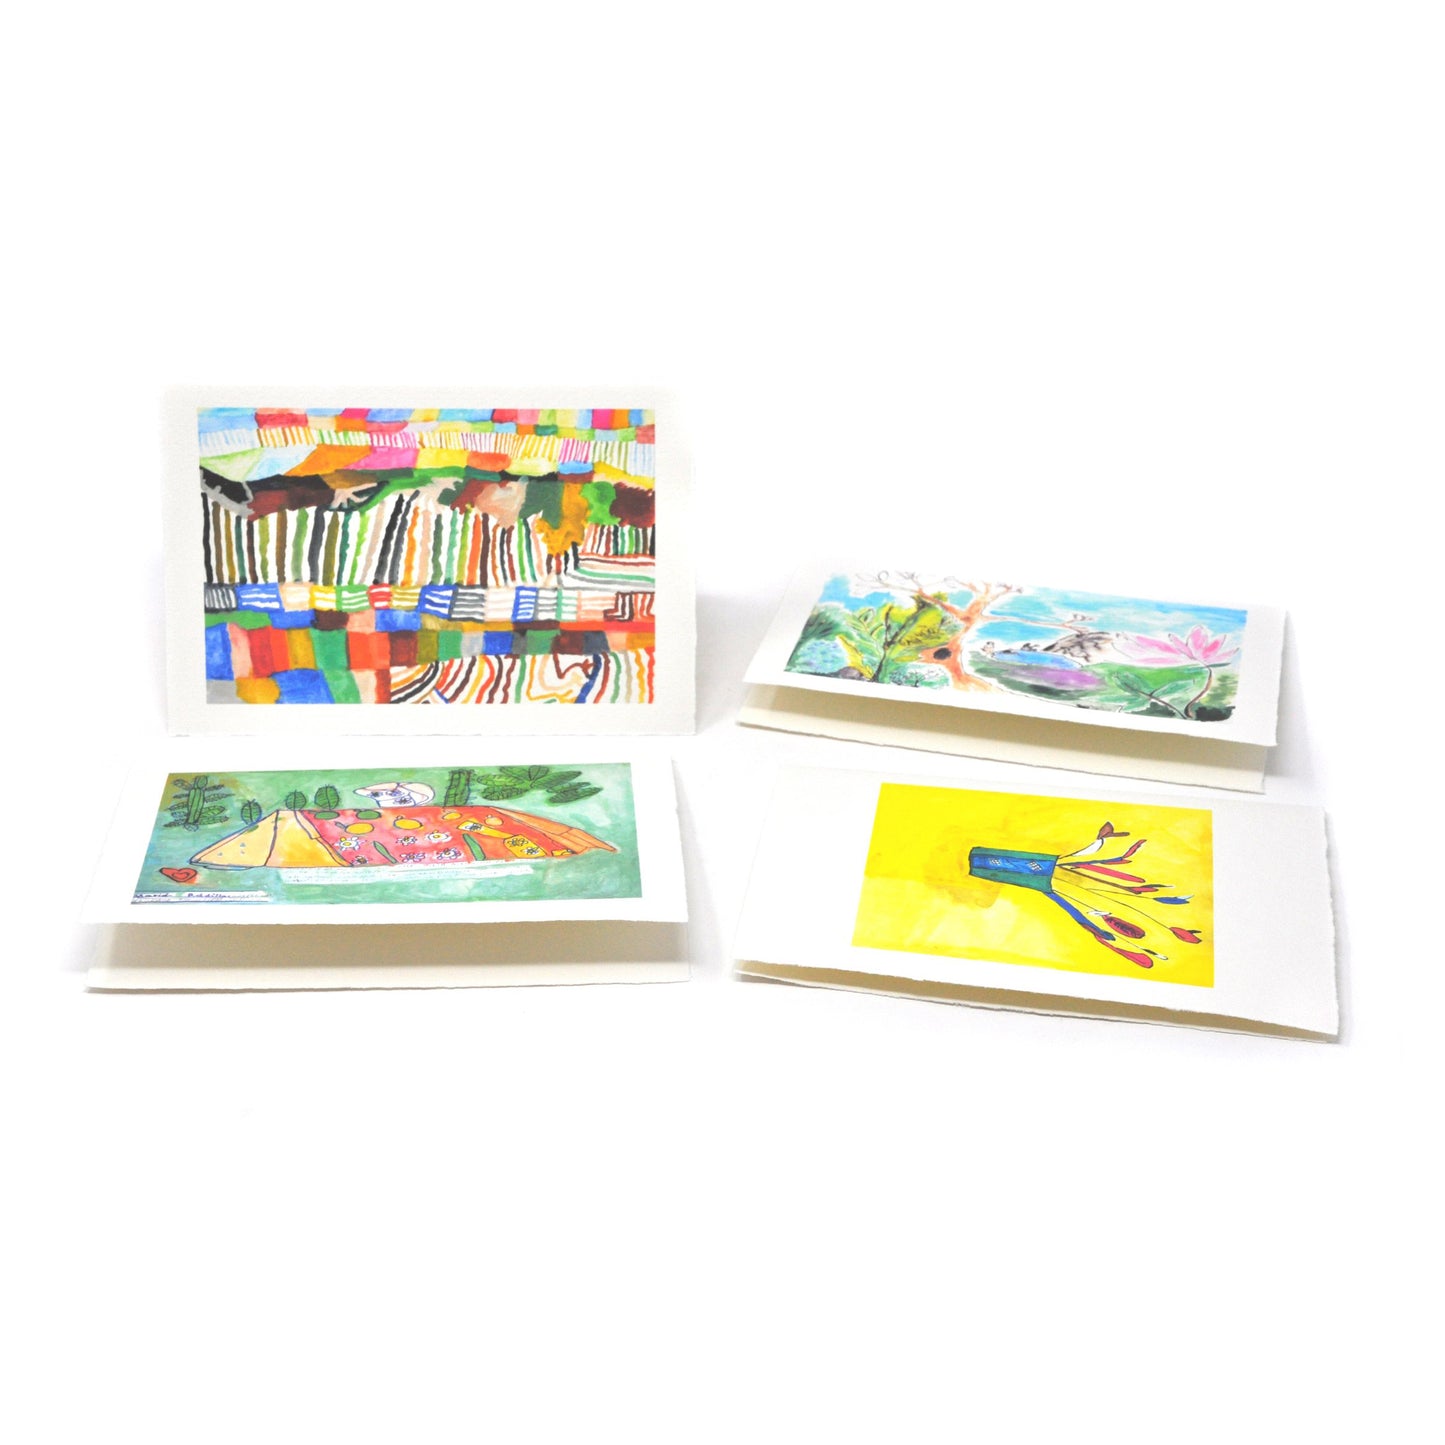 NIAD Greeting Cards (Four-Pack)